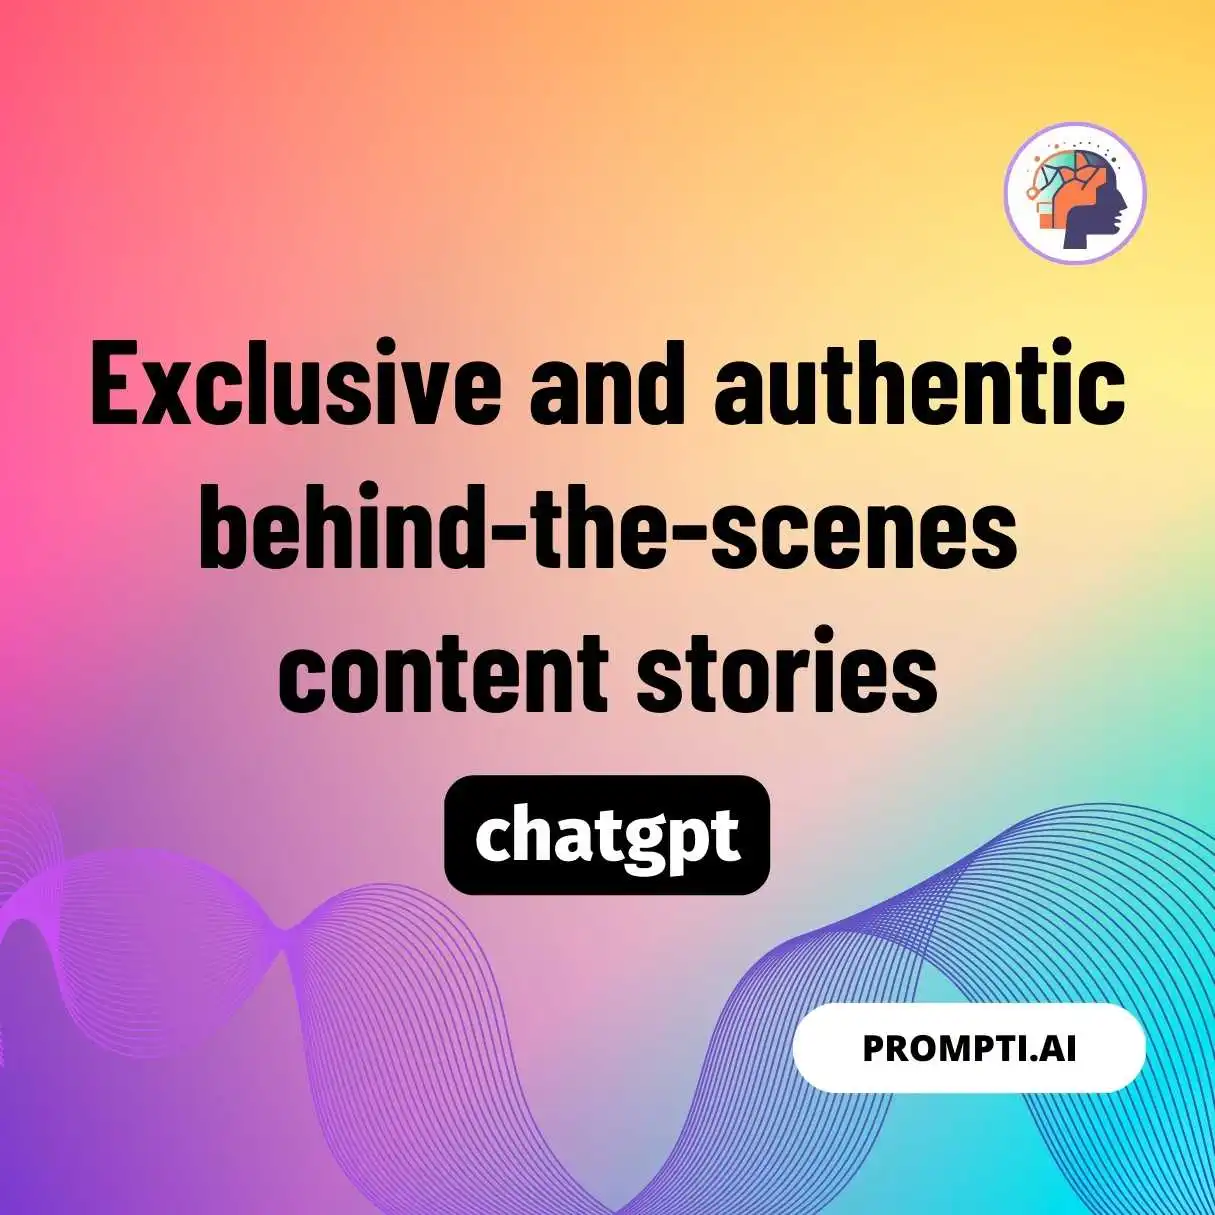 Exclusive and authentic behind-the-scenes content stories